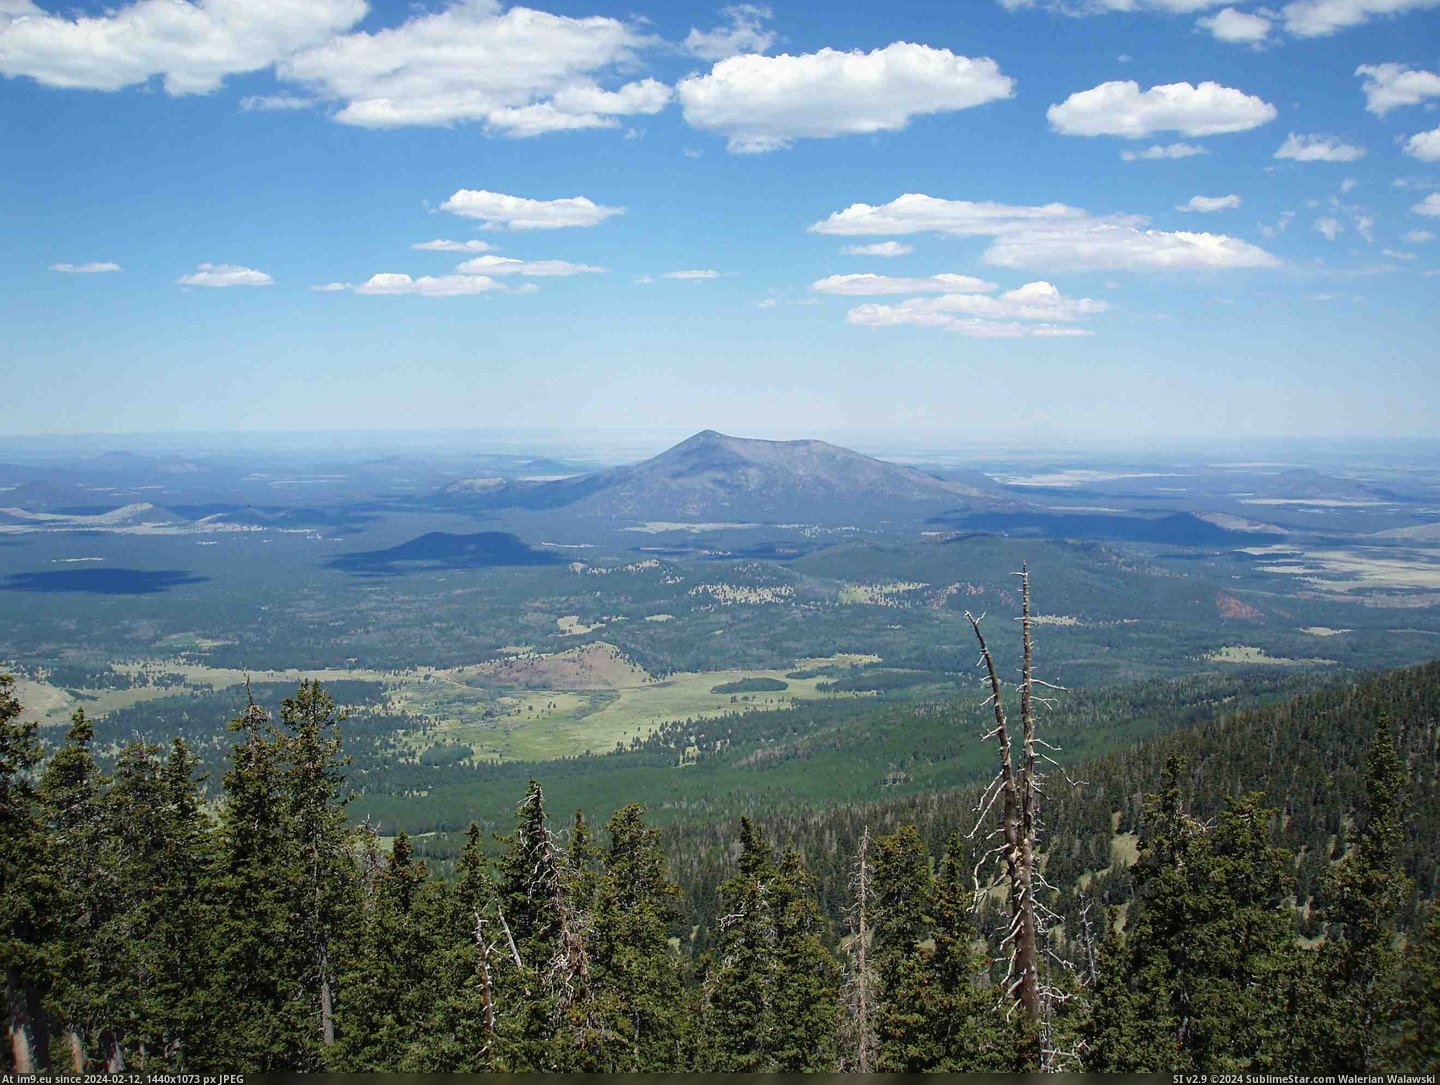 #Off #Couple #Point #Highest #Relaxing #Humphreys #Weeks #Peak #Arizona [Earthporn] A relaxing pic I took a couple weeks back while looking down off the highest point in Arizona - Humphreys Peak [2460 Pic. (Изображение из альбом My r/EARTHPORN favs))